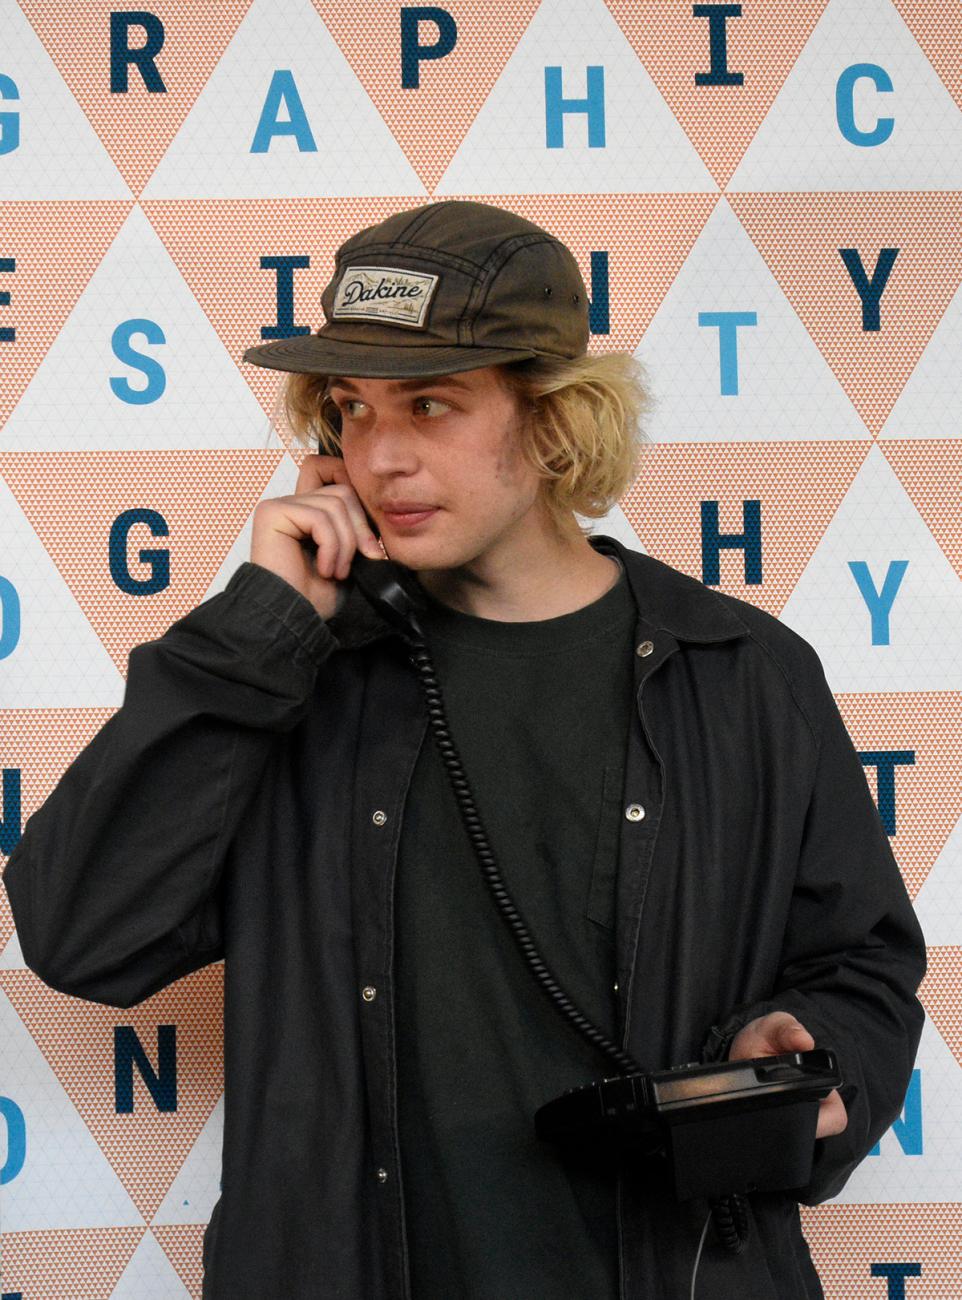 a young person with a black ball cap talks on an older style phone with a corded handset